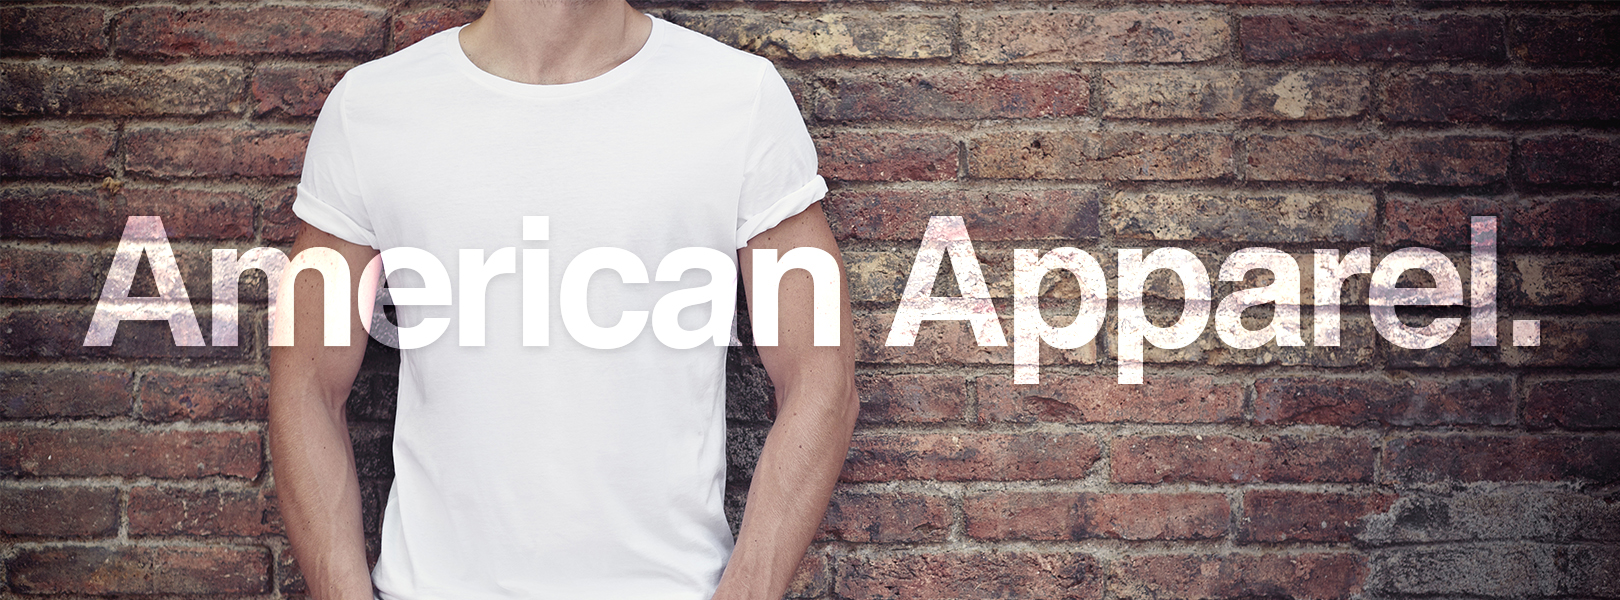 More options: Introducing American Apparel shirts